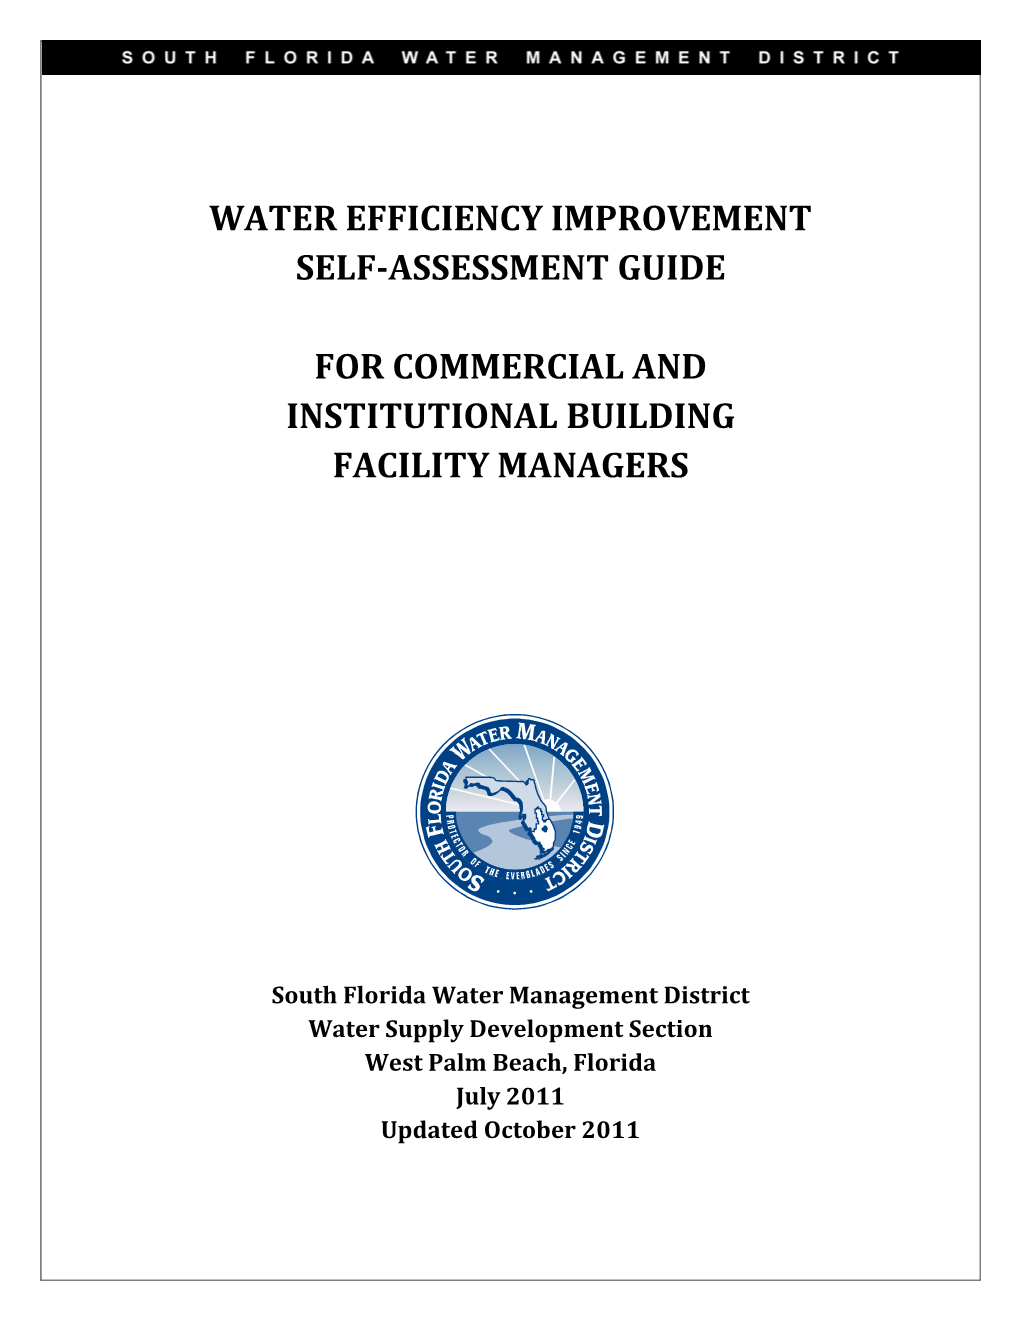 Water Efficiency Improvement Self-Assessment Guide for Commercial and Institutional Building Facility Managers